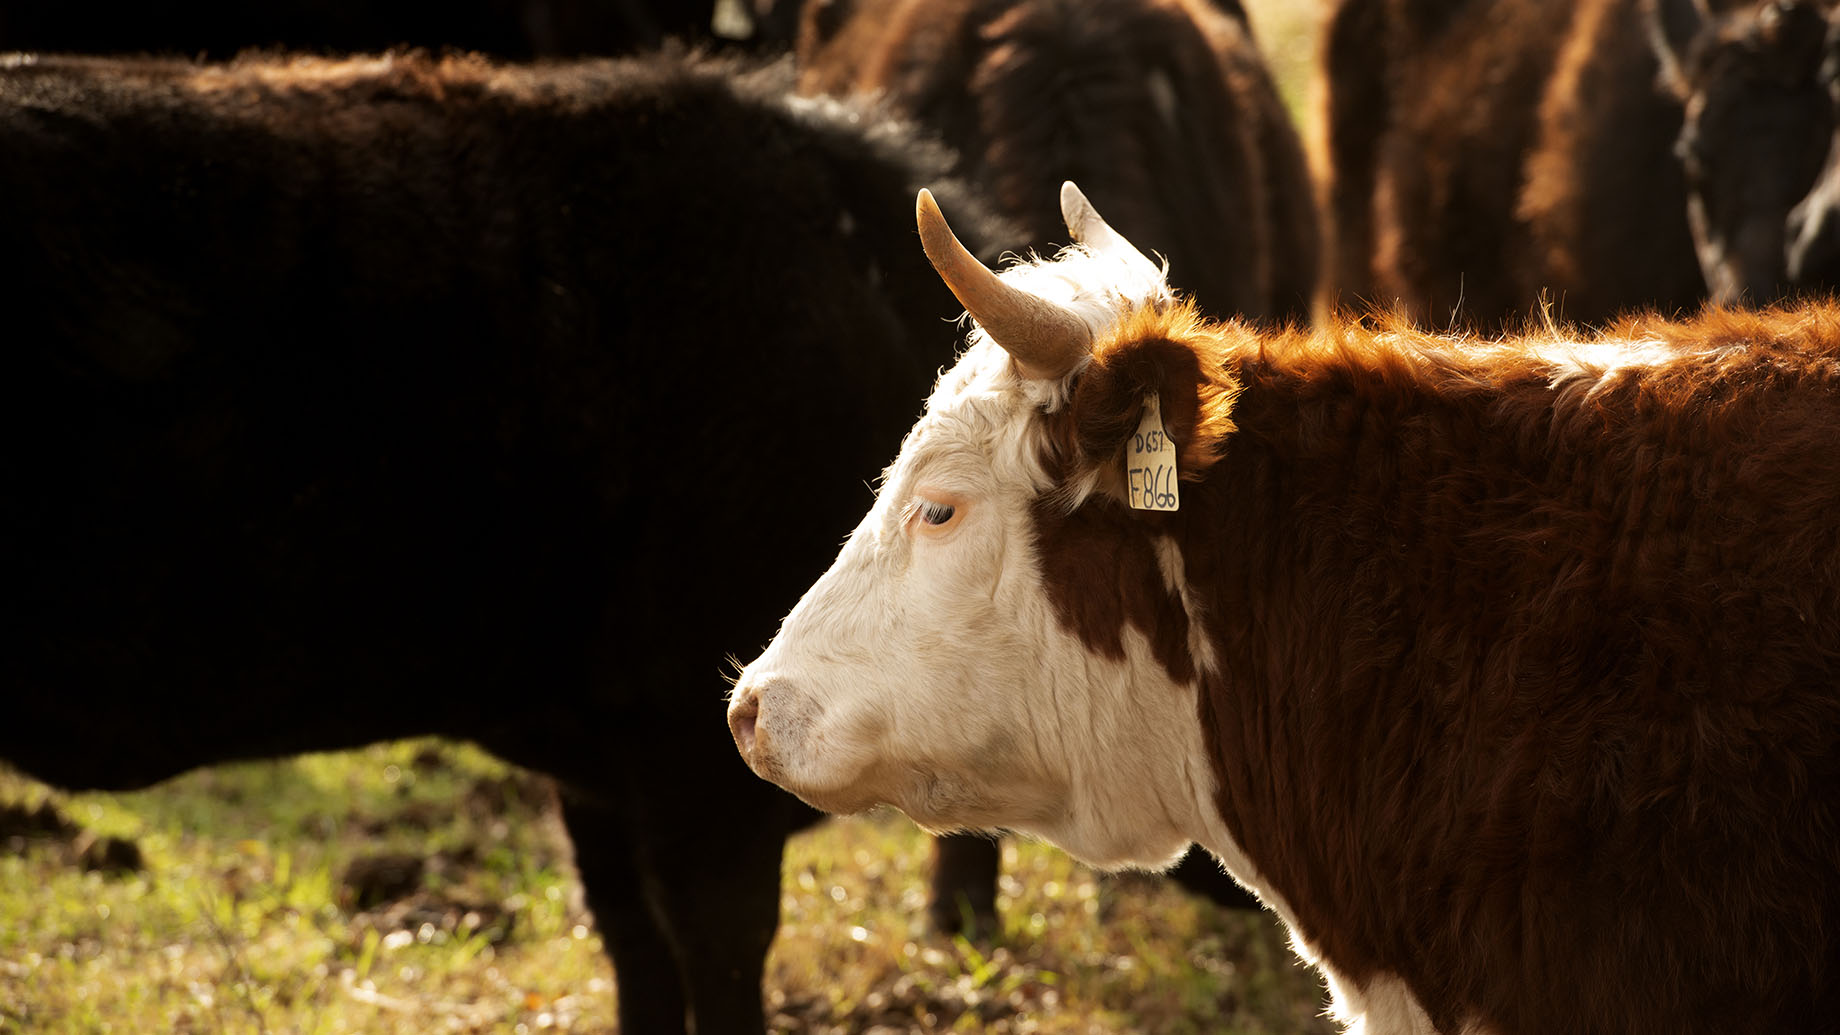 herd of beef cattle with closeup of one cow with white head and brown body